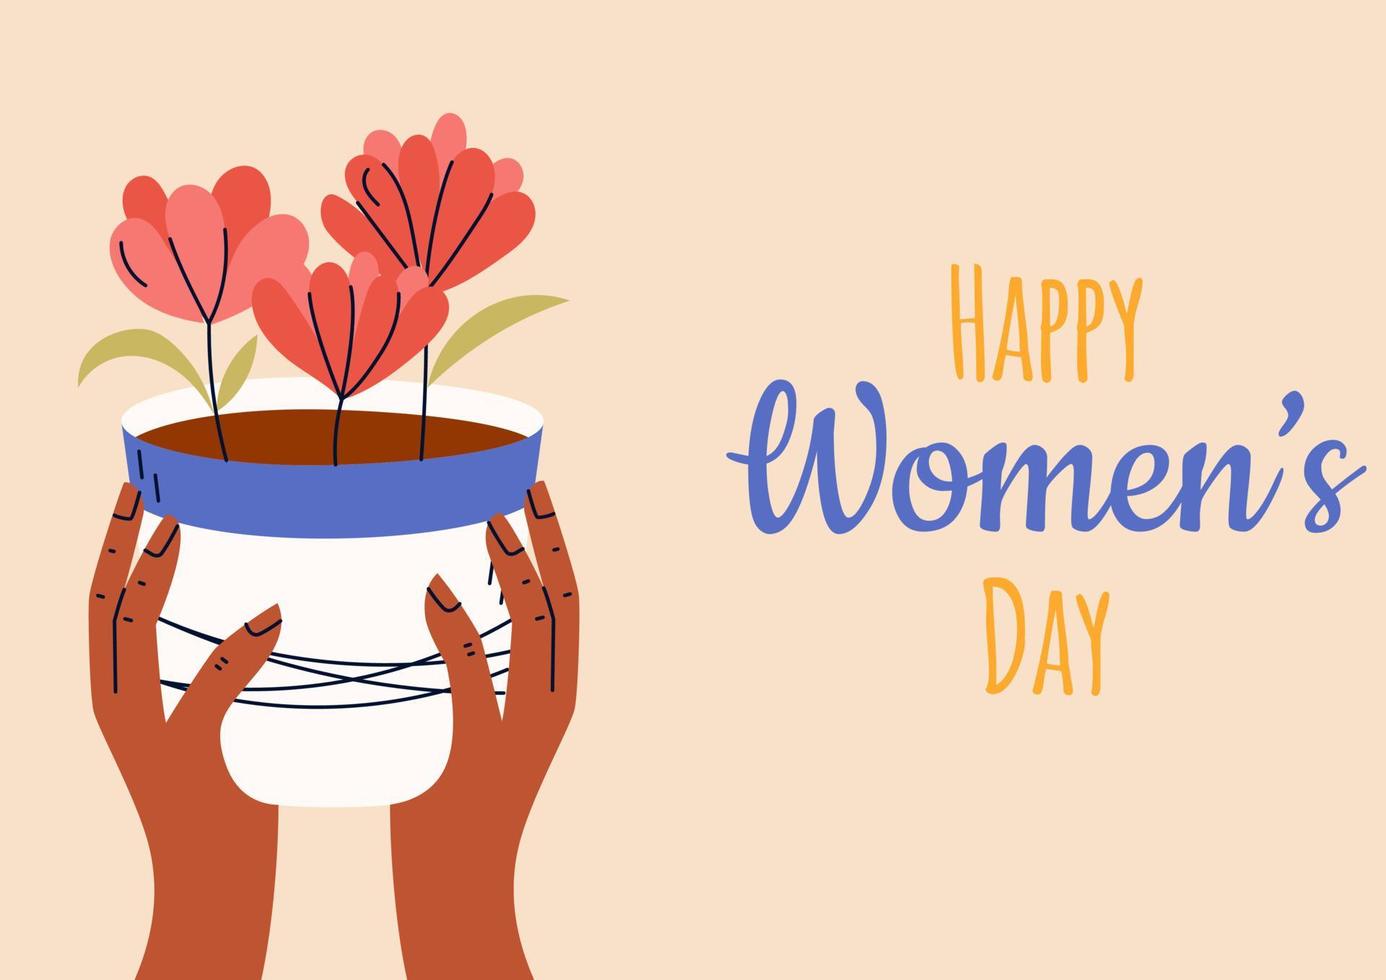 8 march, International Women's Day. Greeting card or postcard templates for card, poster, flyer. Girl power, feminism, sisterhood concept. vector